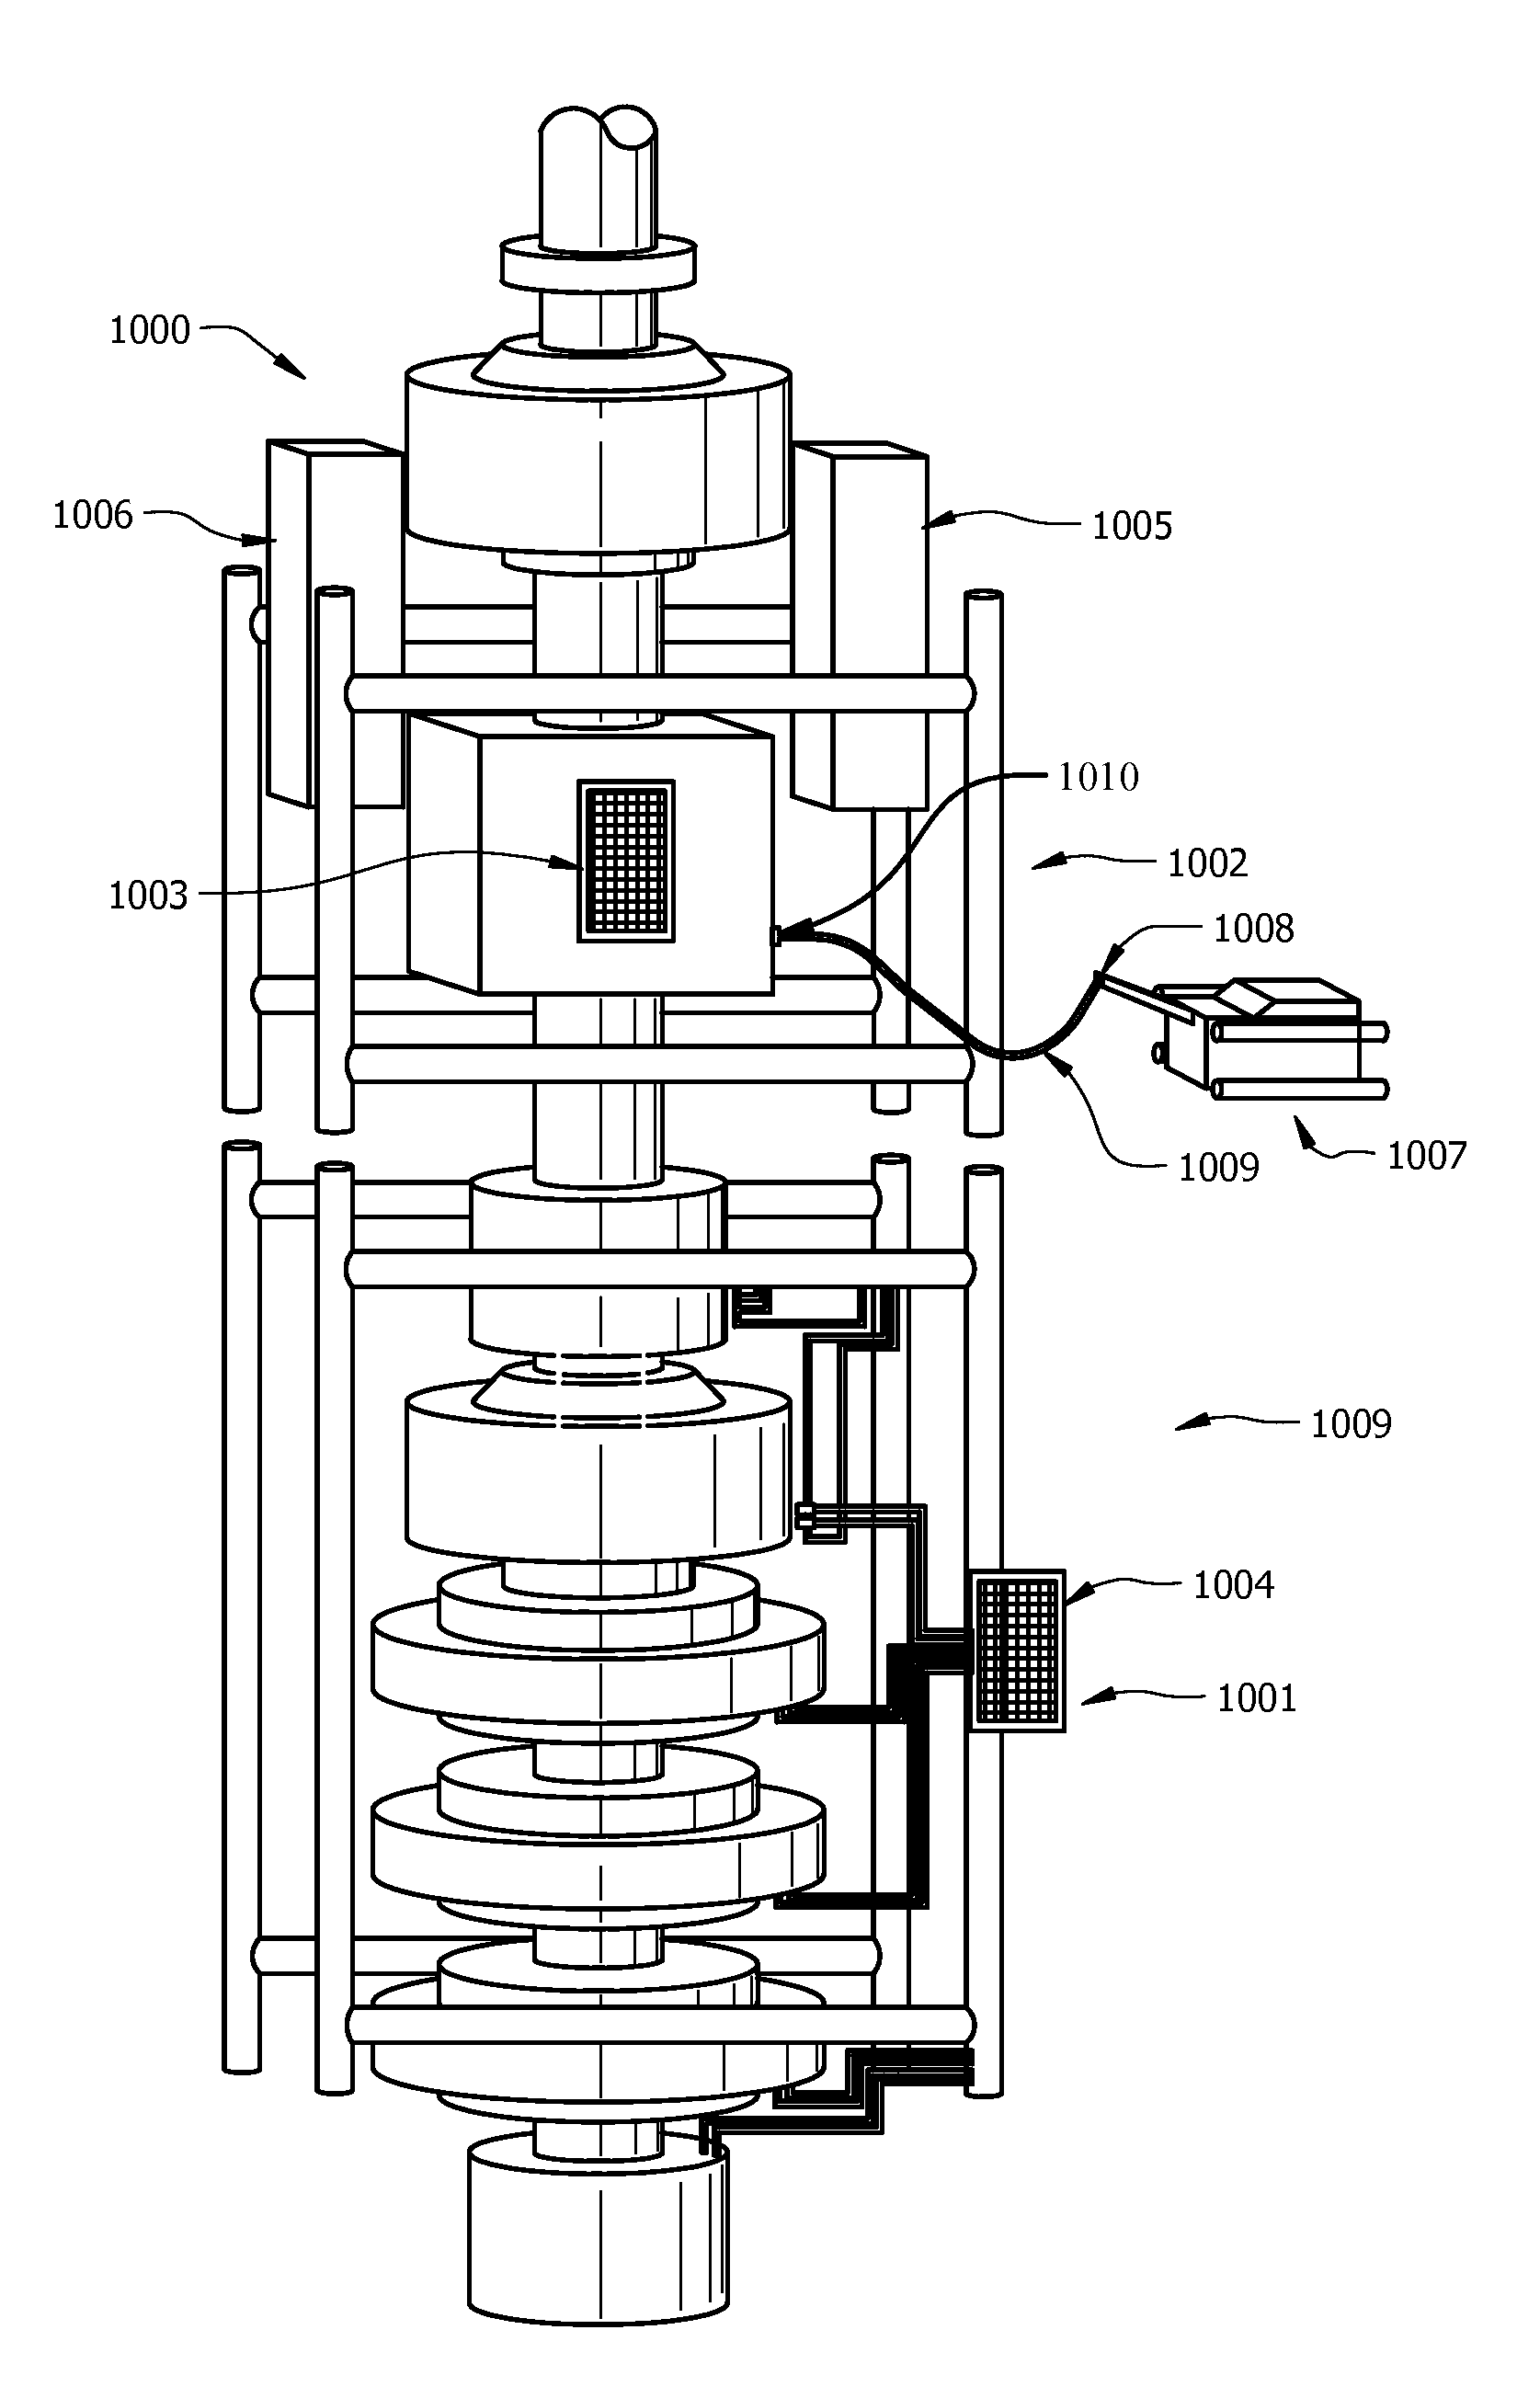 System and method for providing additional blowout preventer control redundancy